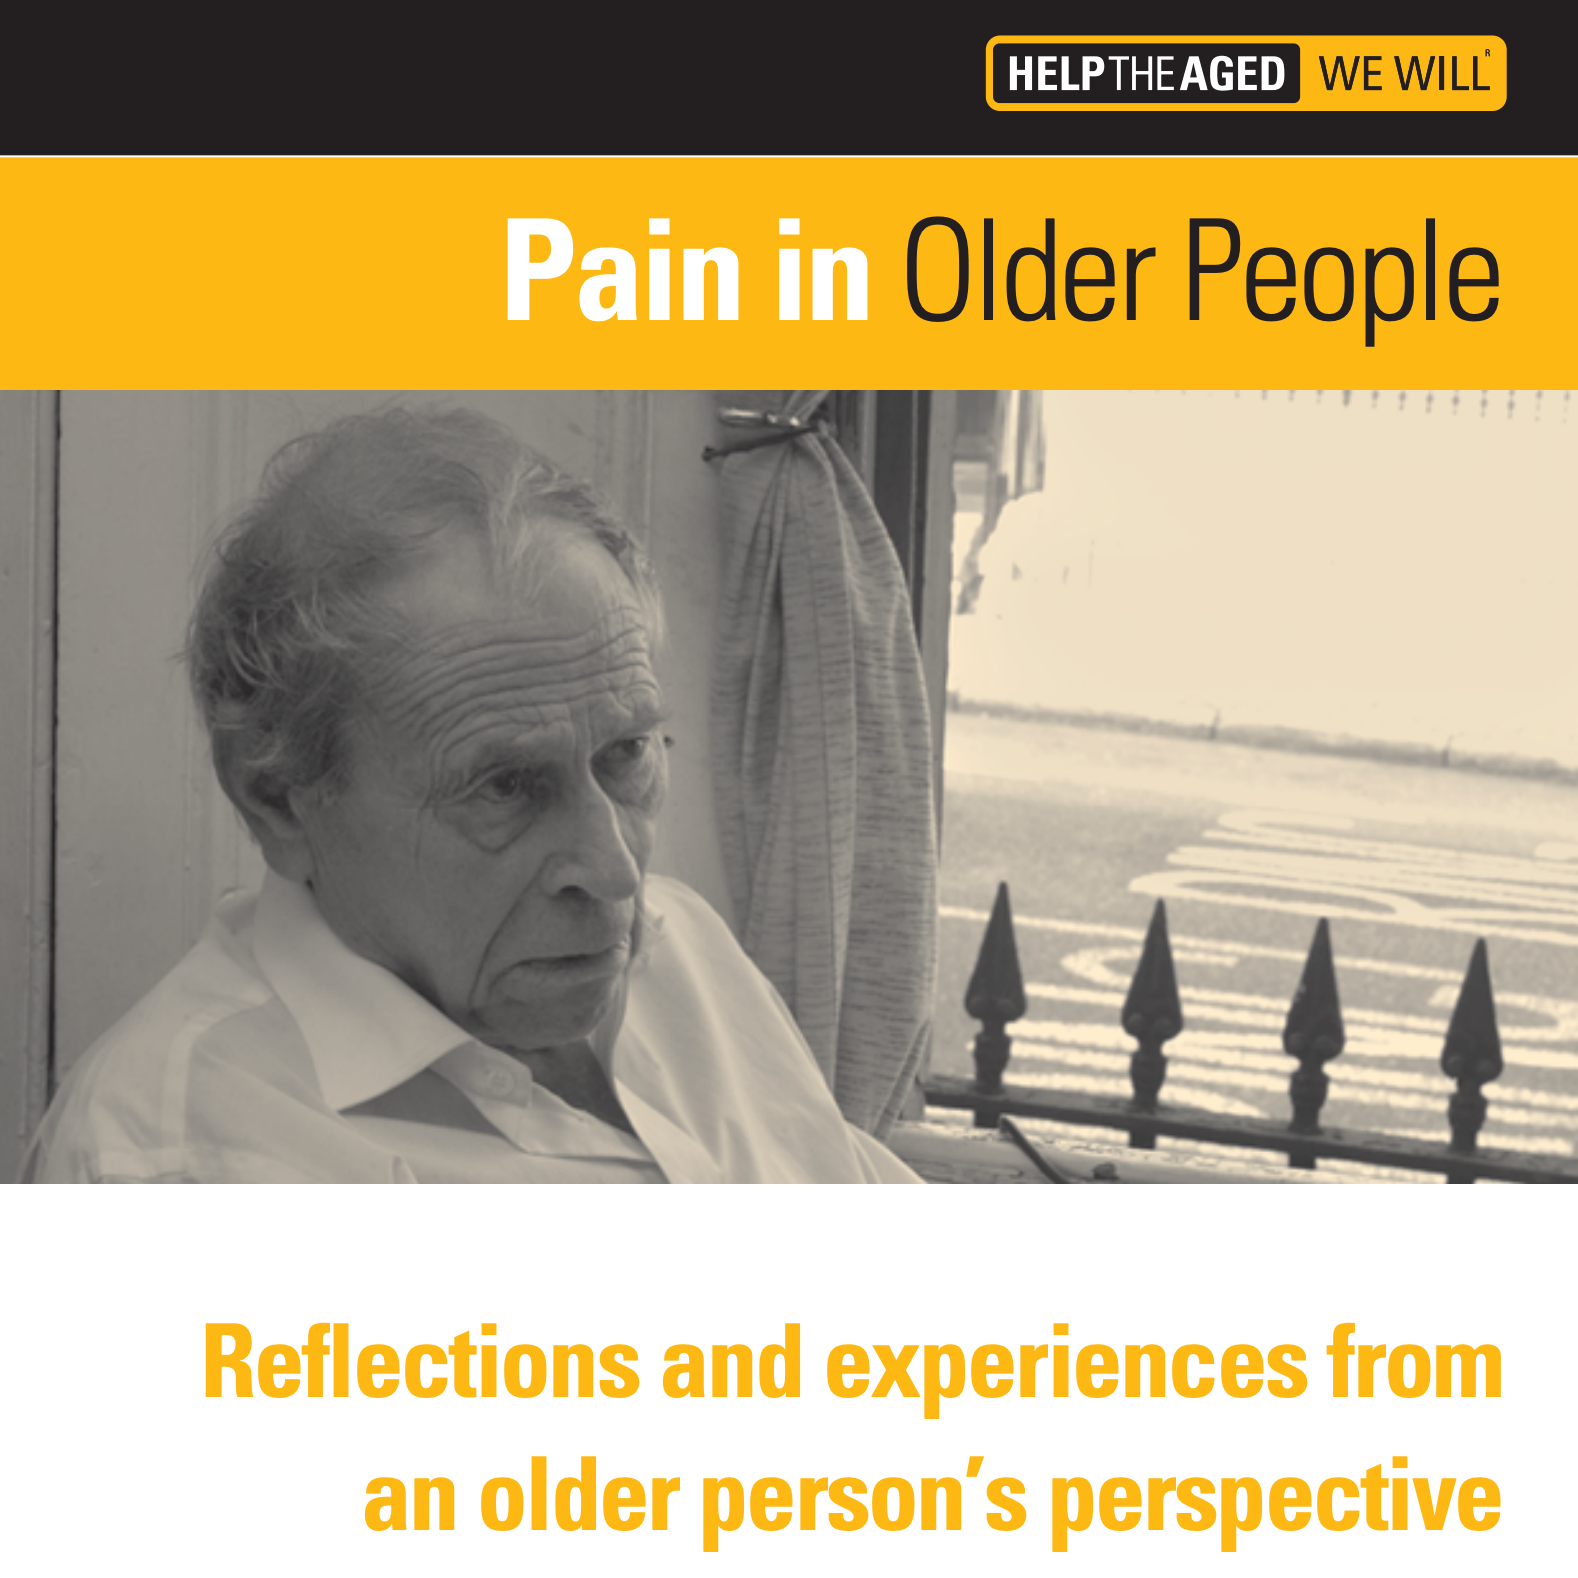 PAIN IN OLDER PEOPLE: REFLECTIONS AND EXPERIENCES FROM AN OLDER PERSON'S PERSPECTIVE